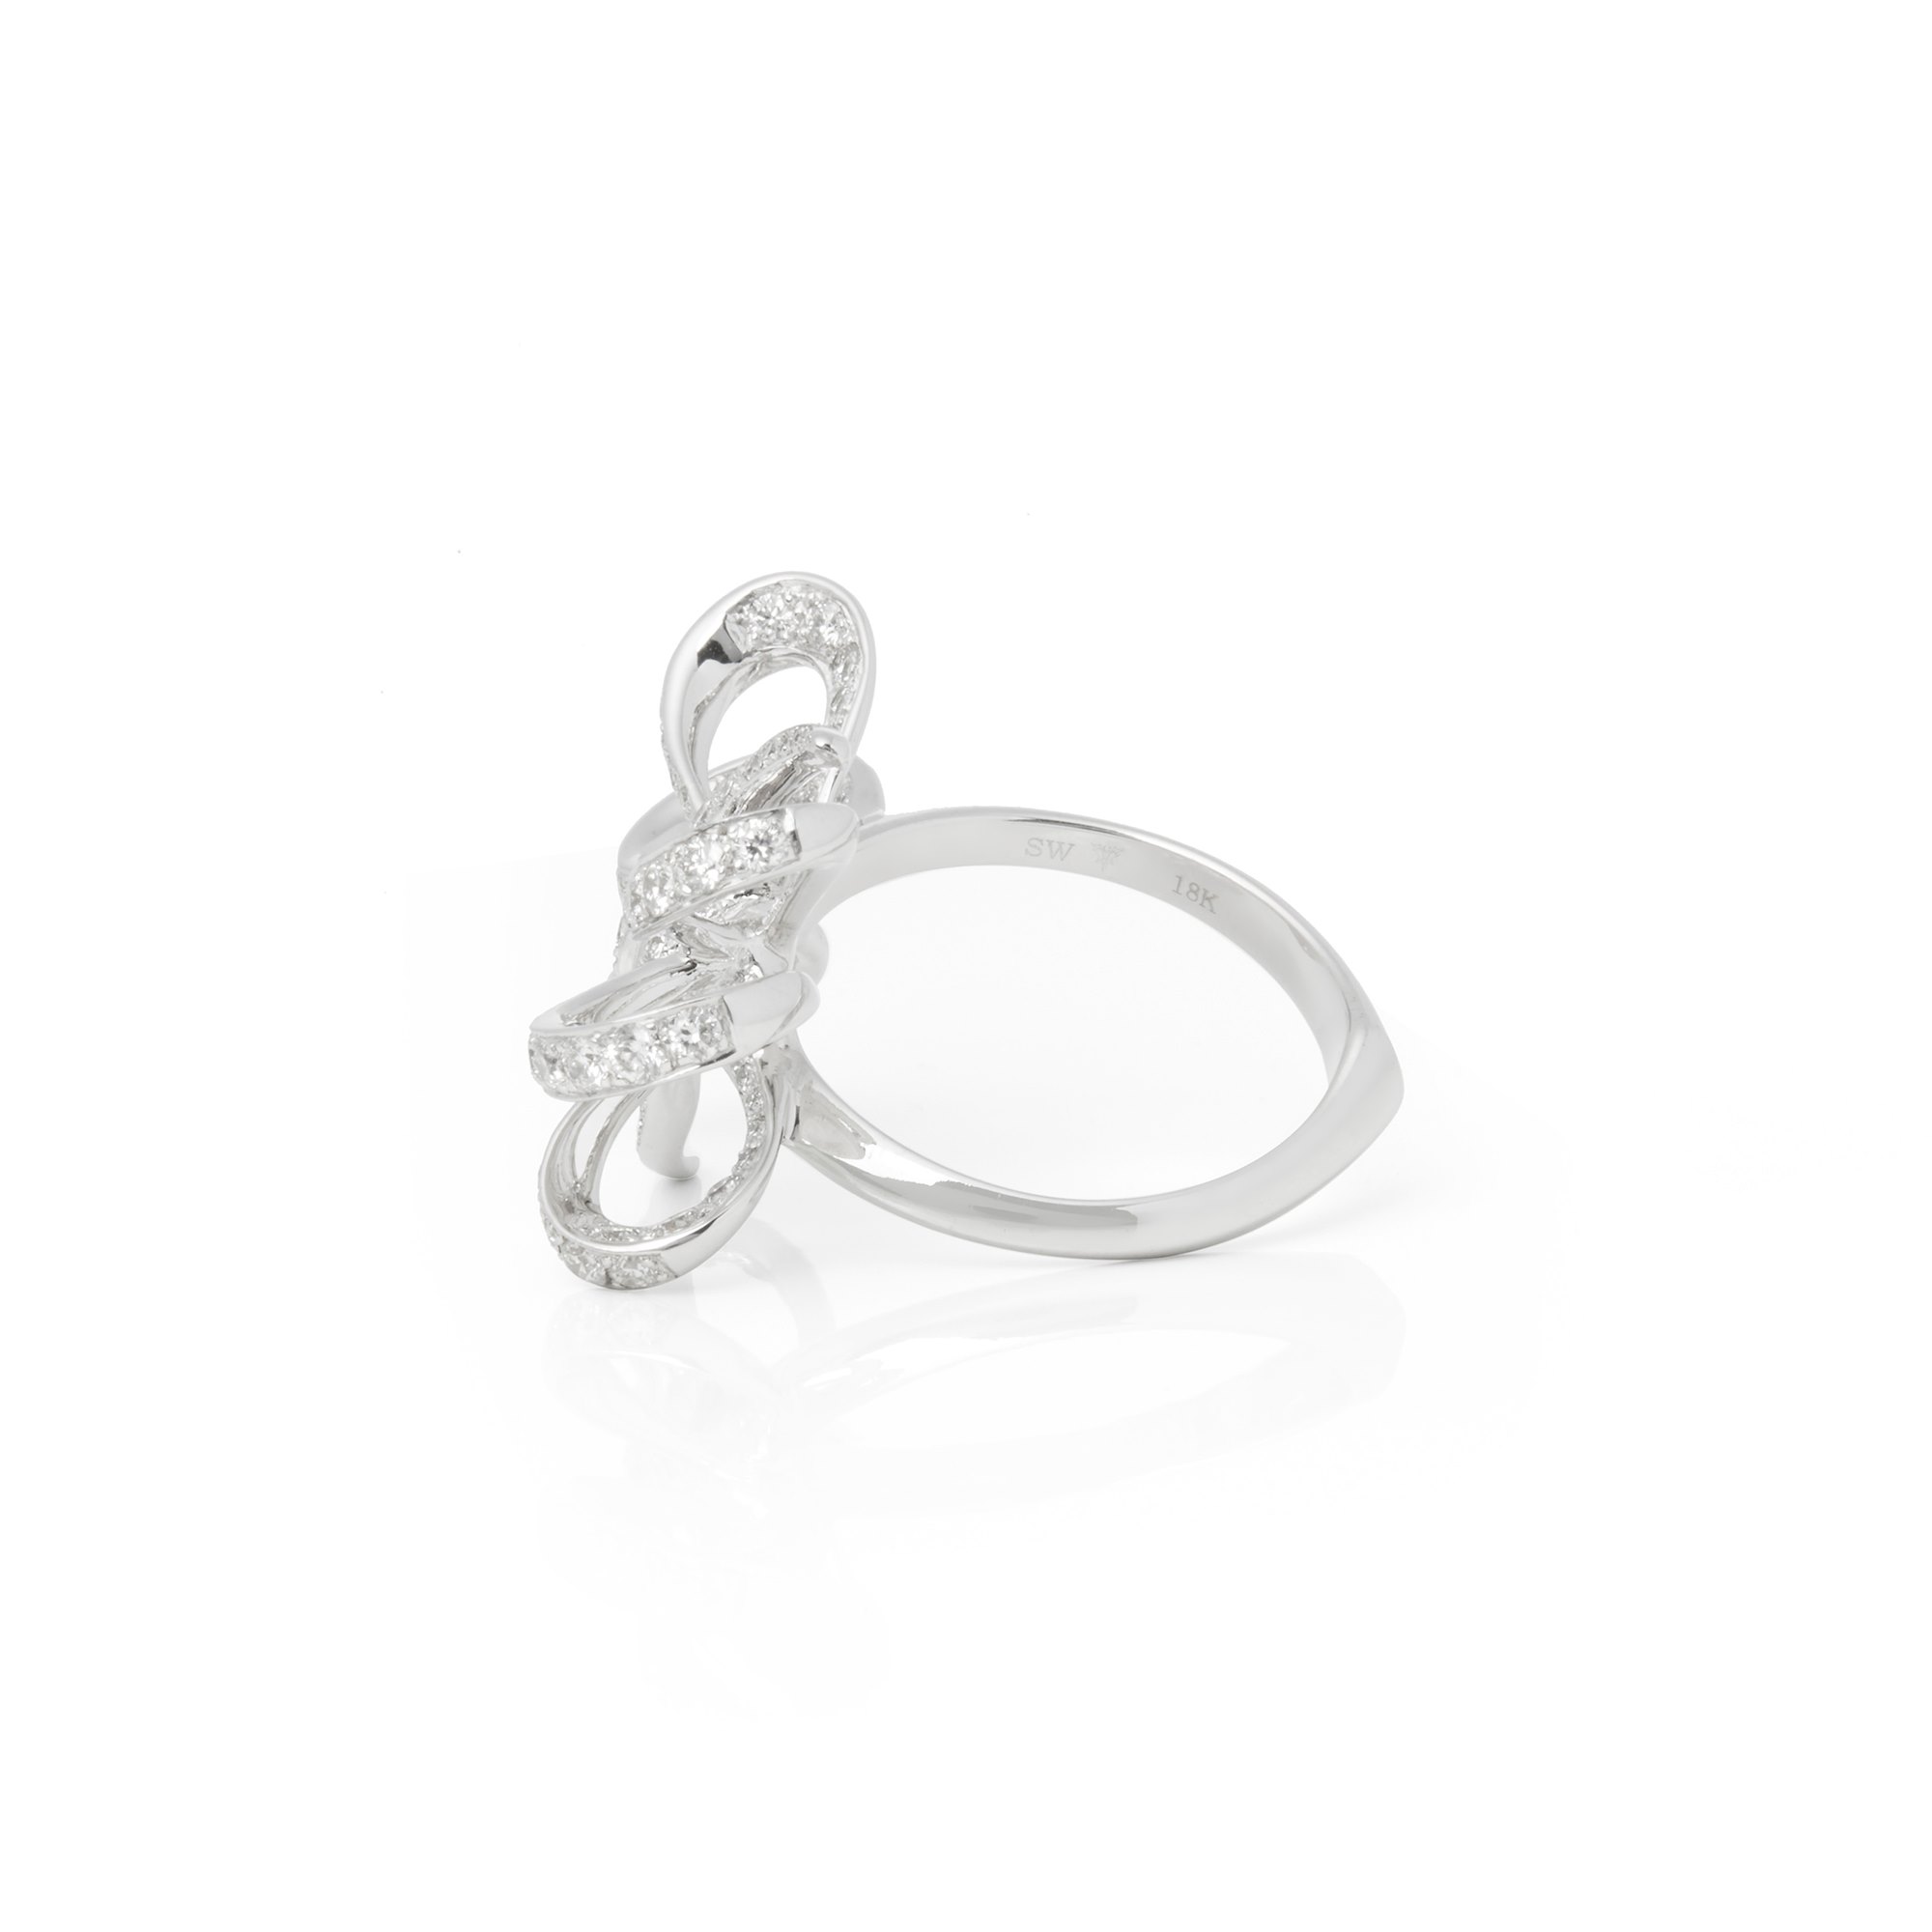 Stephen Webster 18k White Gold Forget Me Knot Pave Diamond Bow Ring